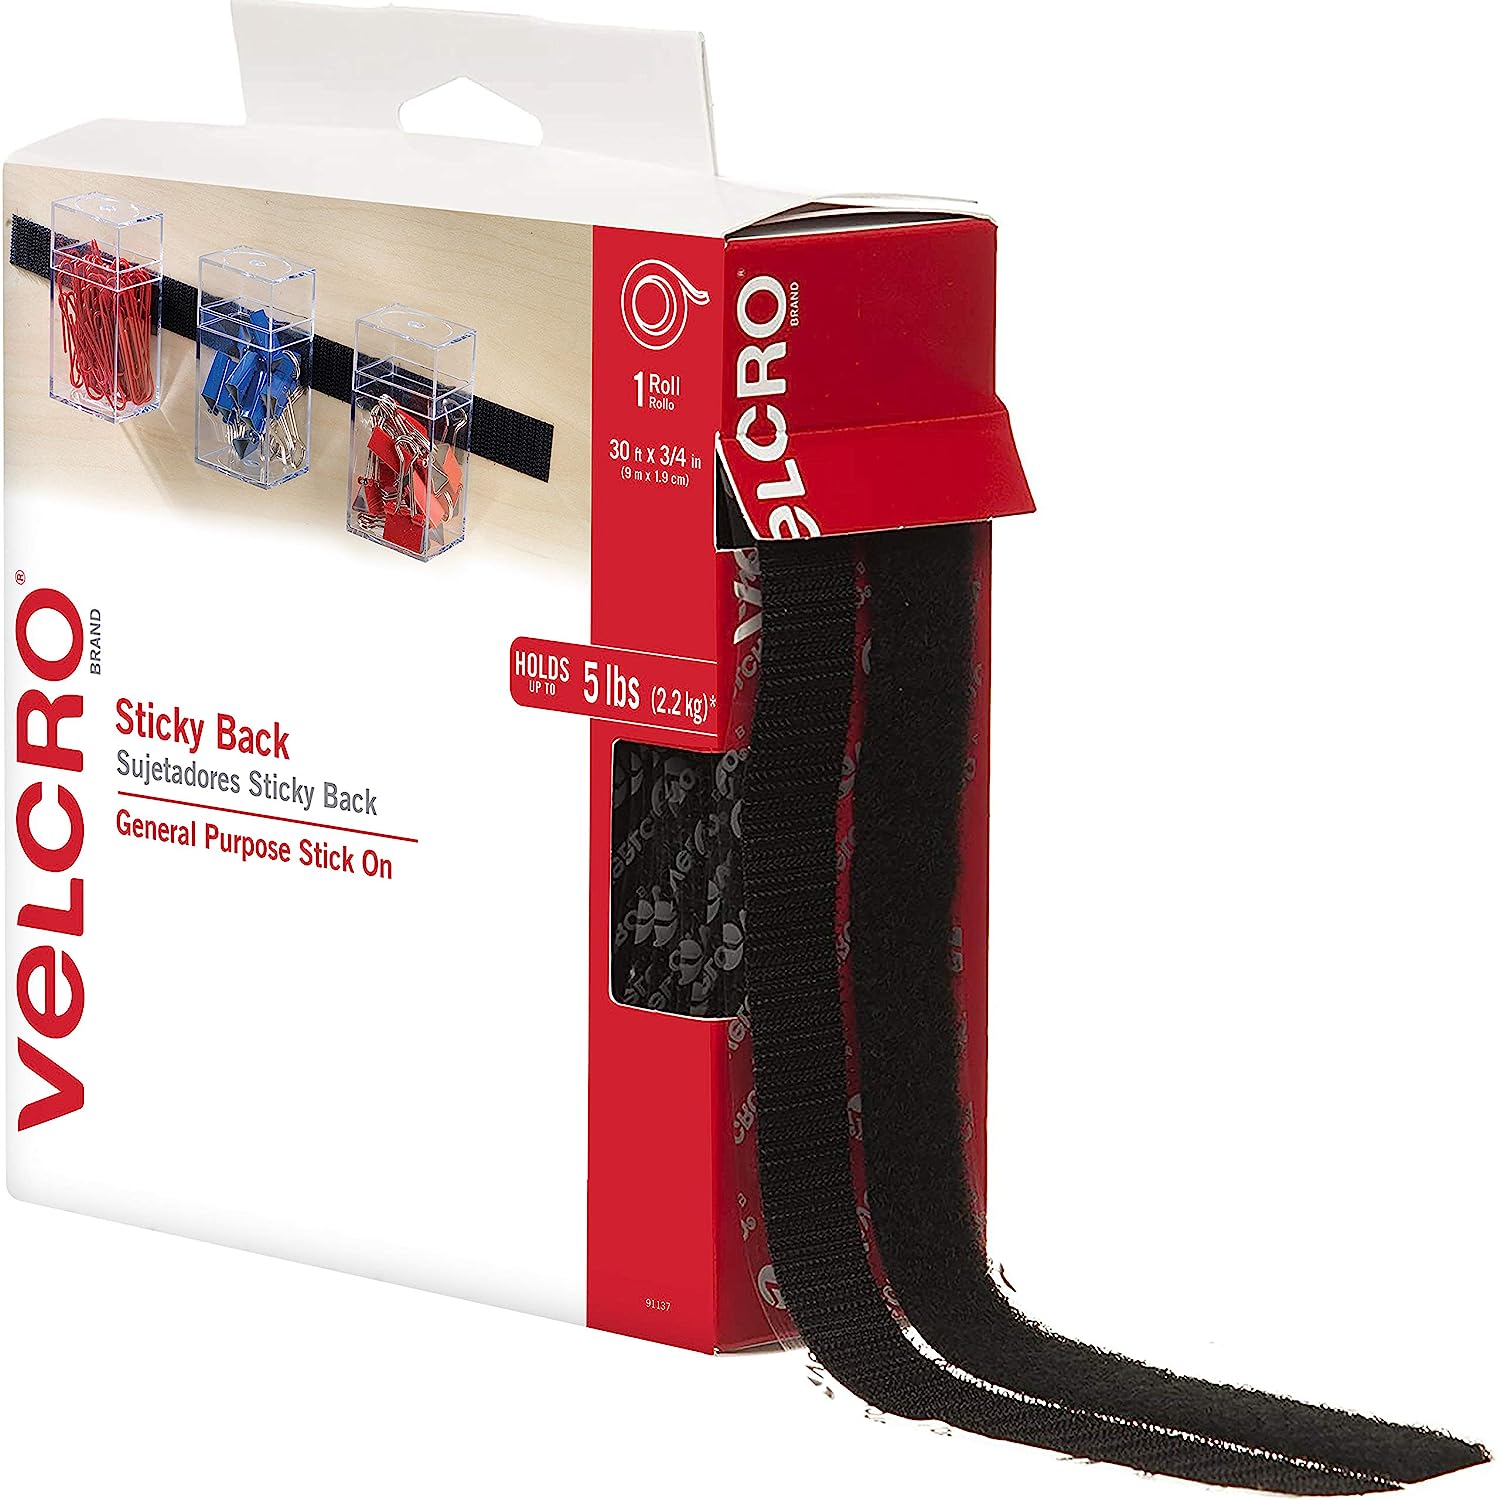 VELCRO Brand – 30 ft Sticky Back Hook and Loop [...]